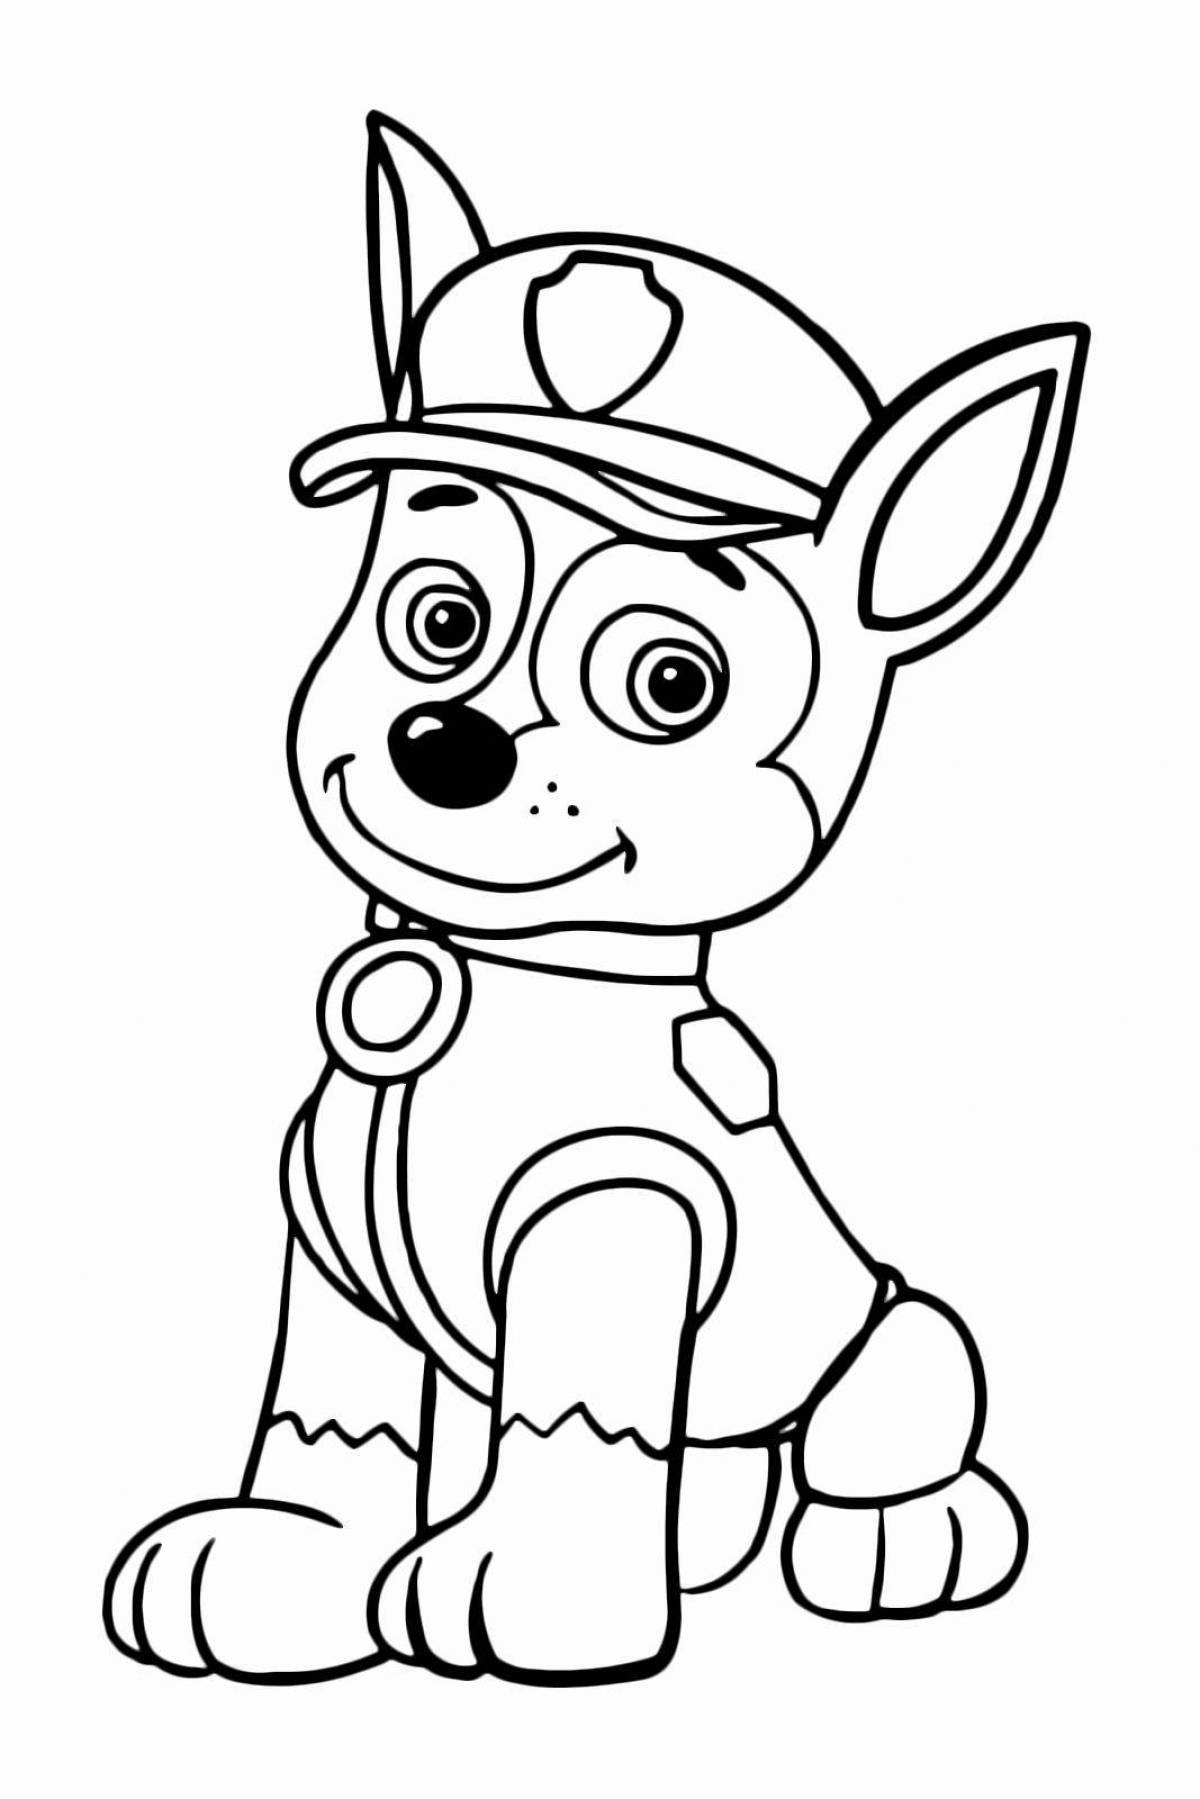 Paw patrol racer live coloring page